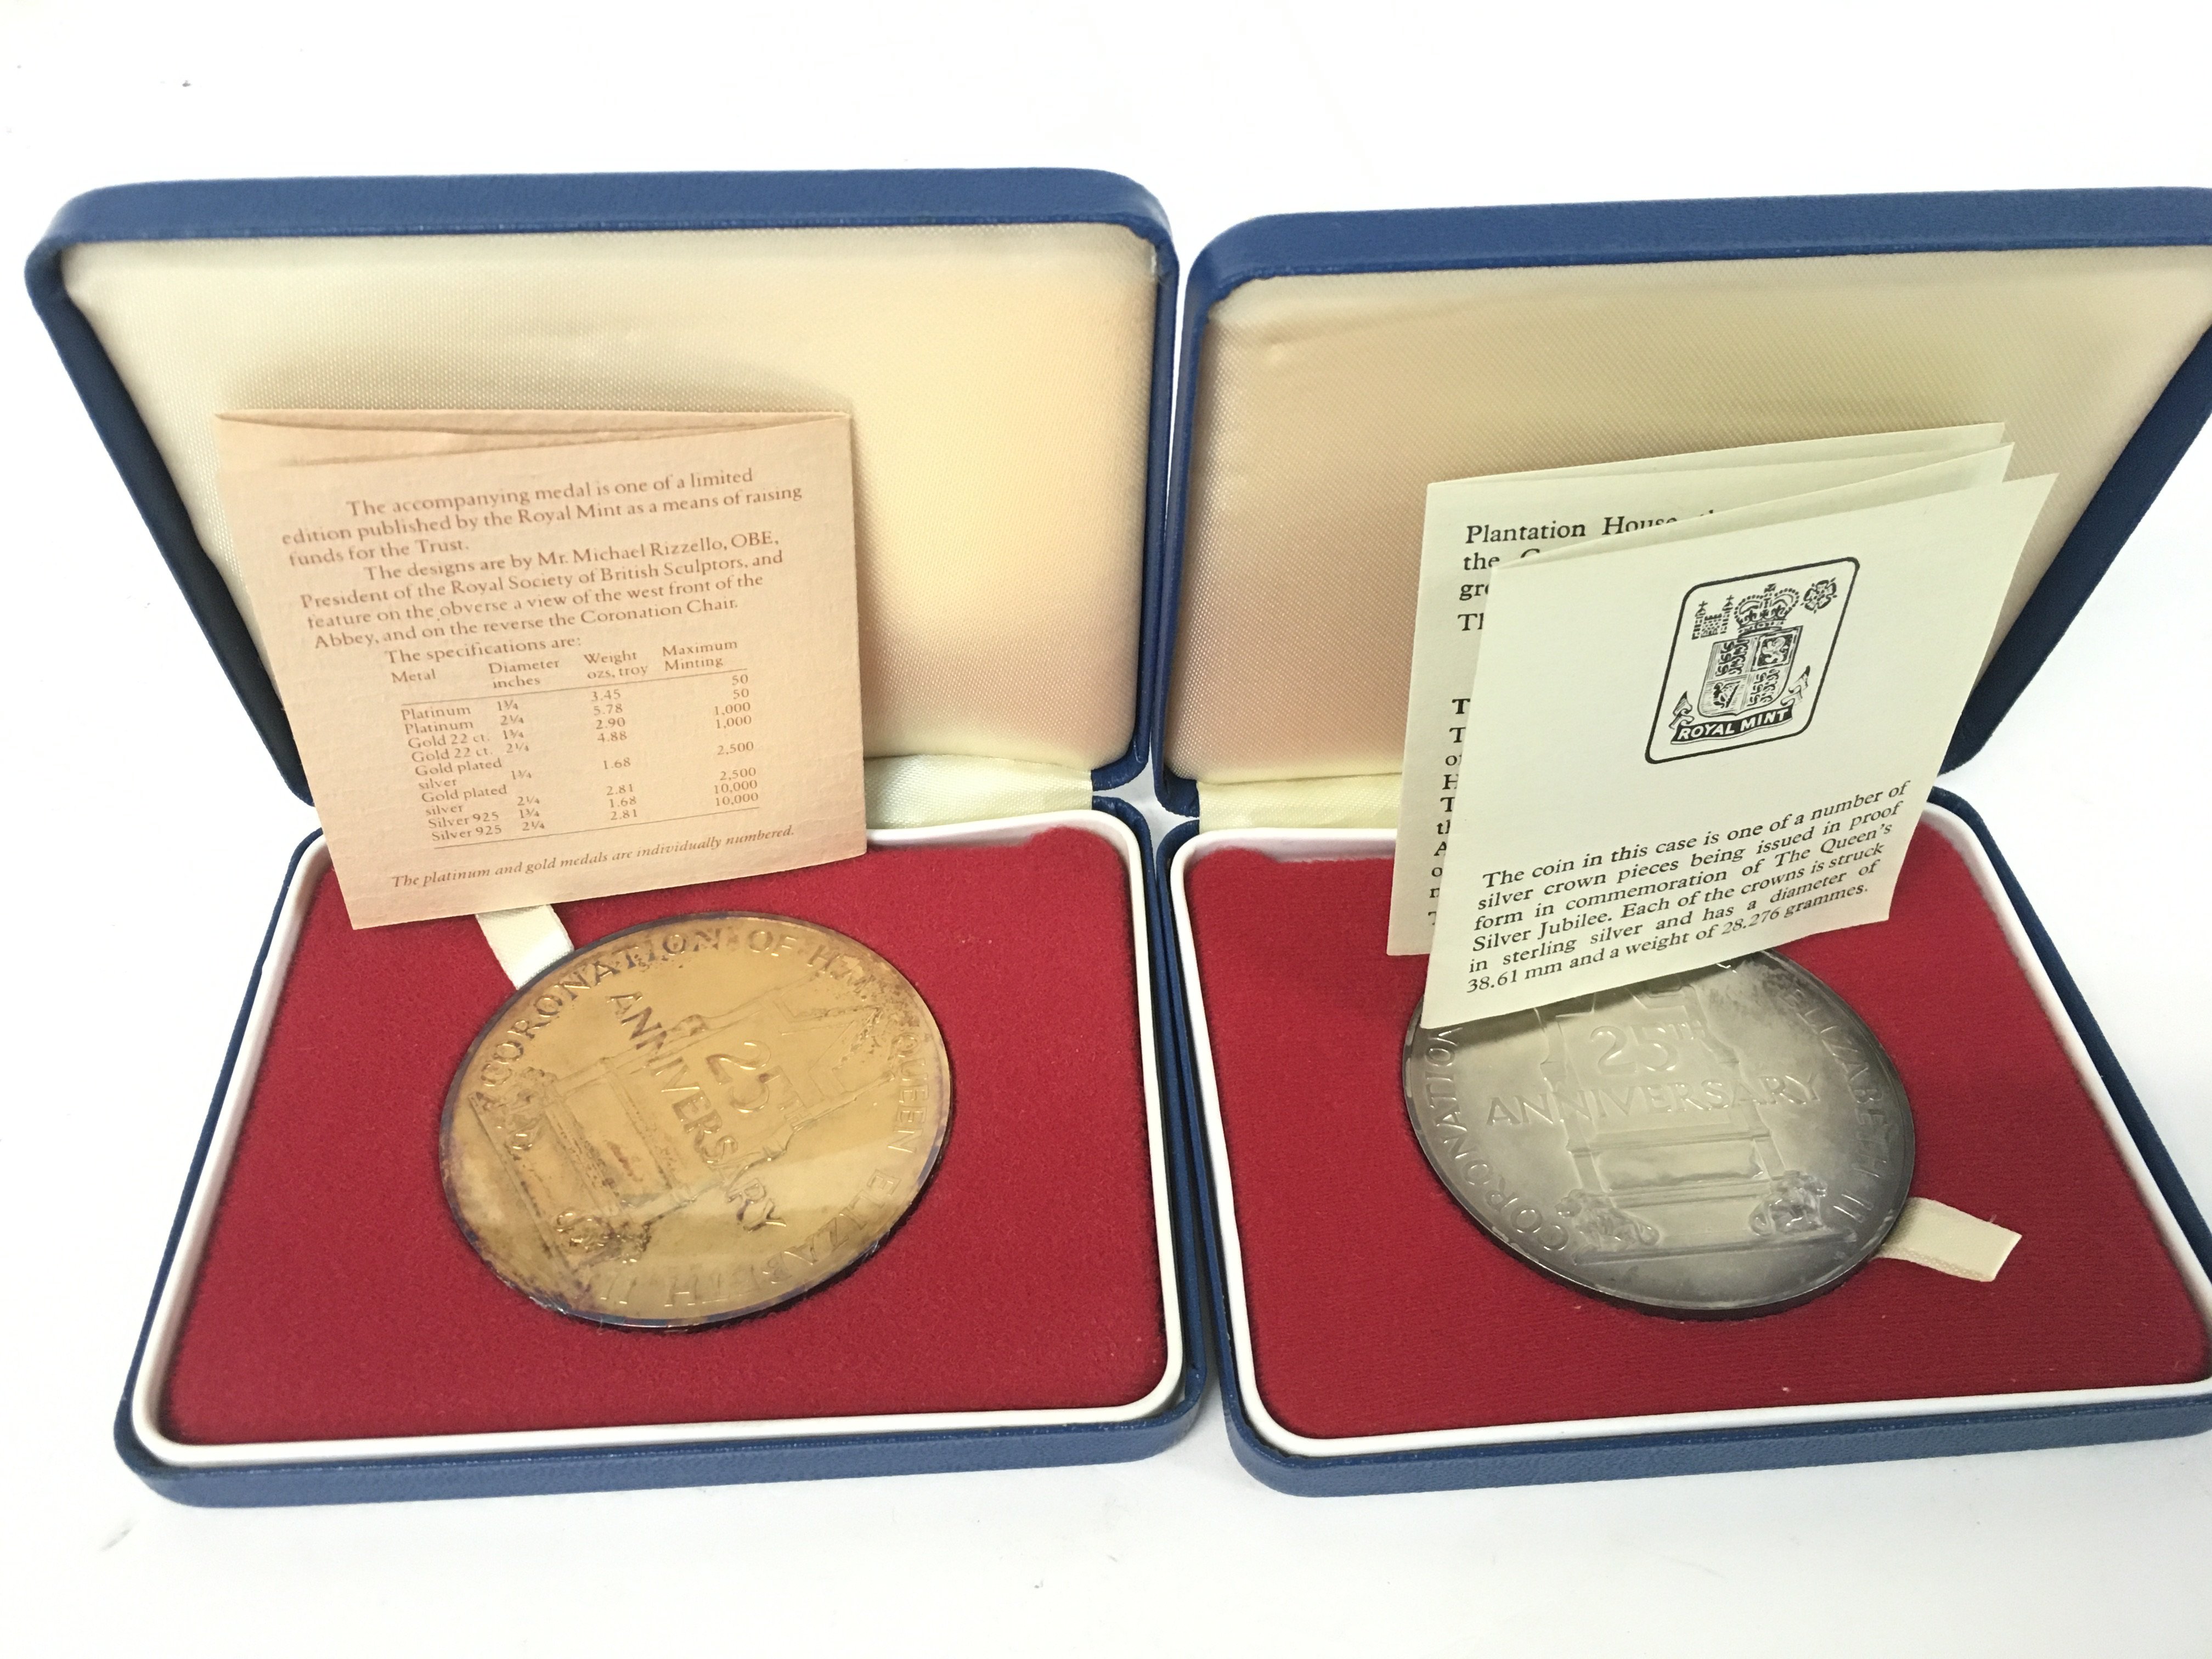 Two medals struck in celebration of the 25th anniv - Image 2 of 4